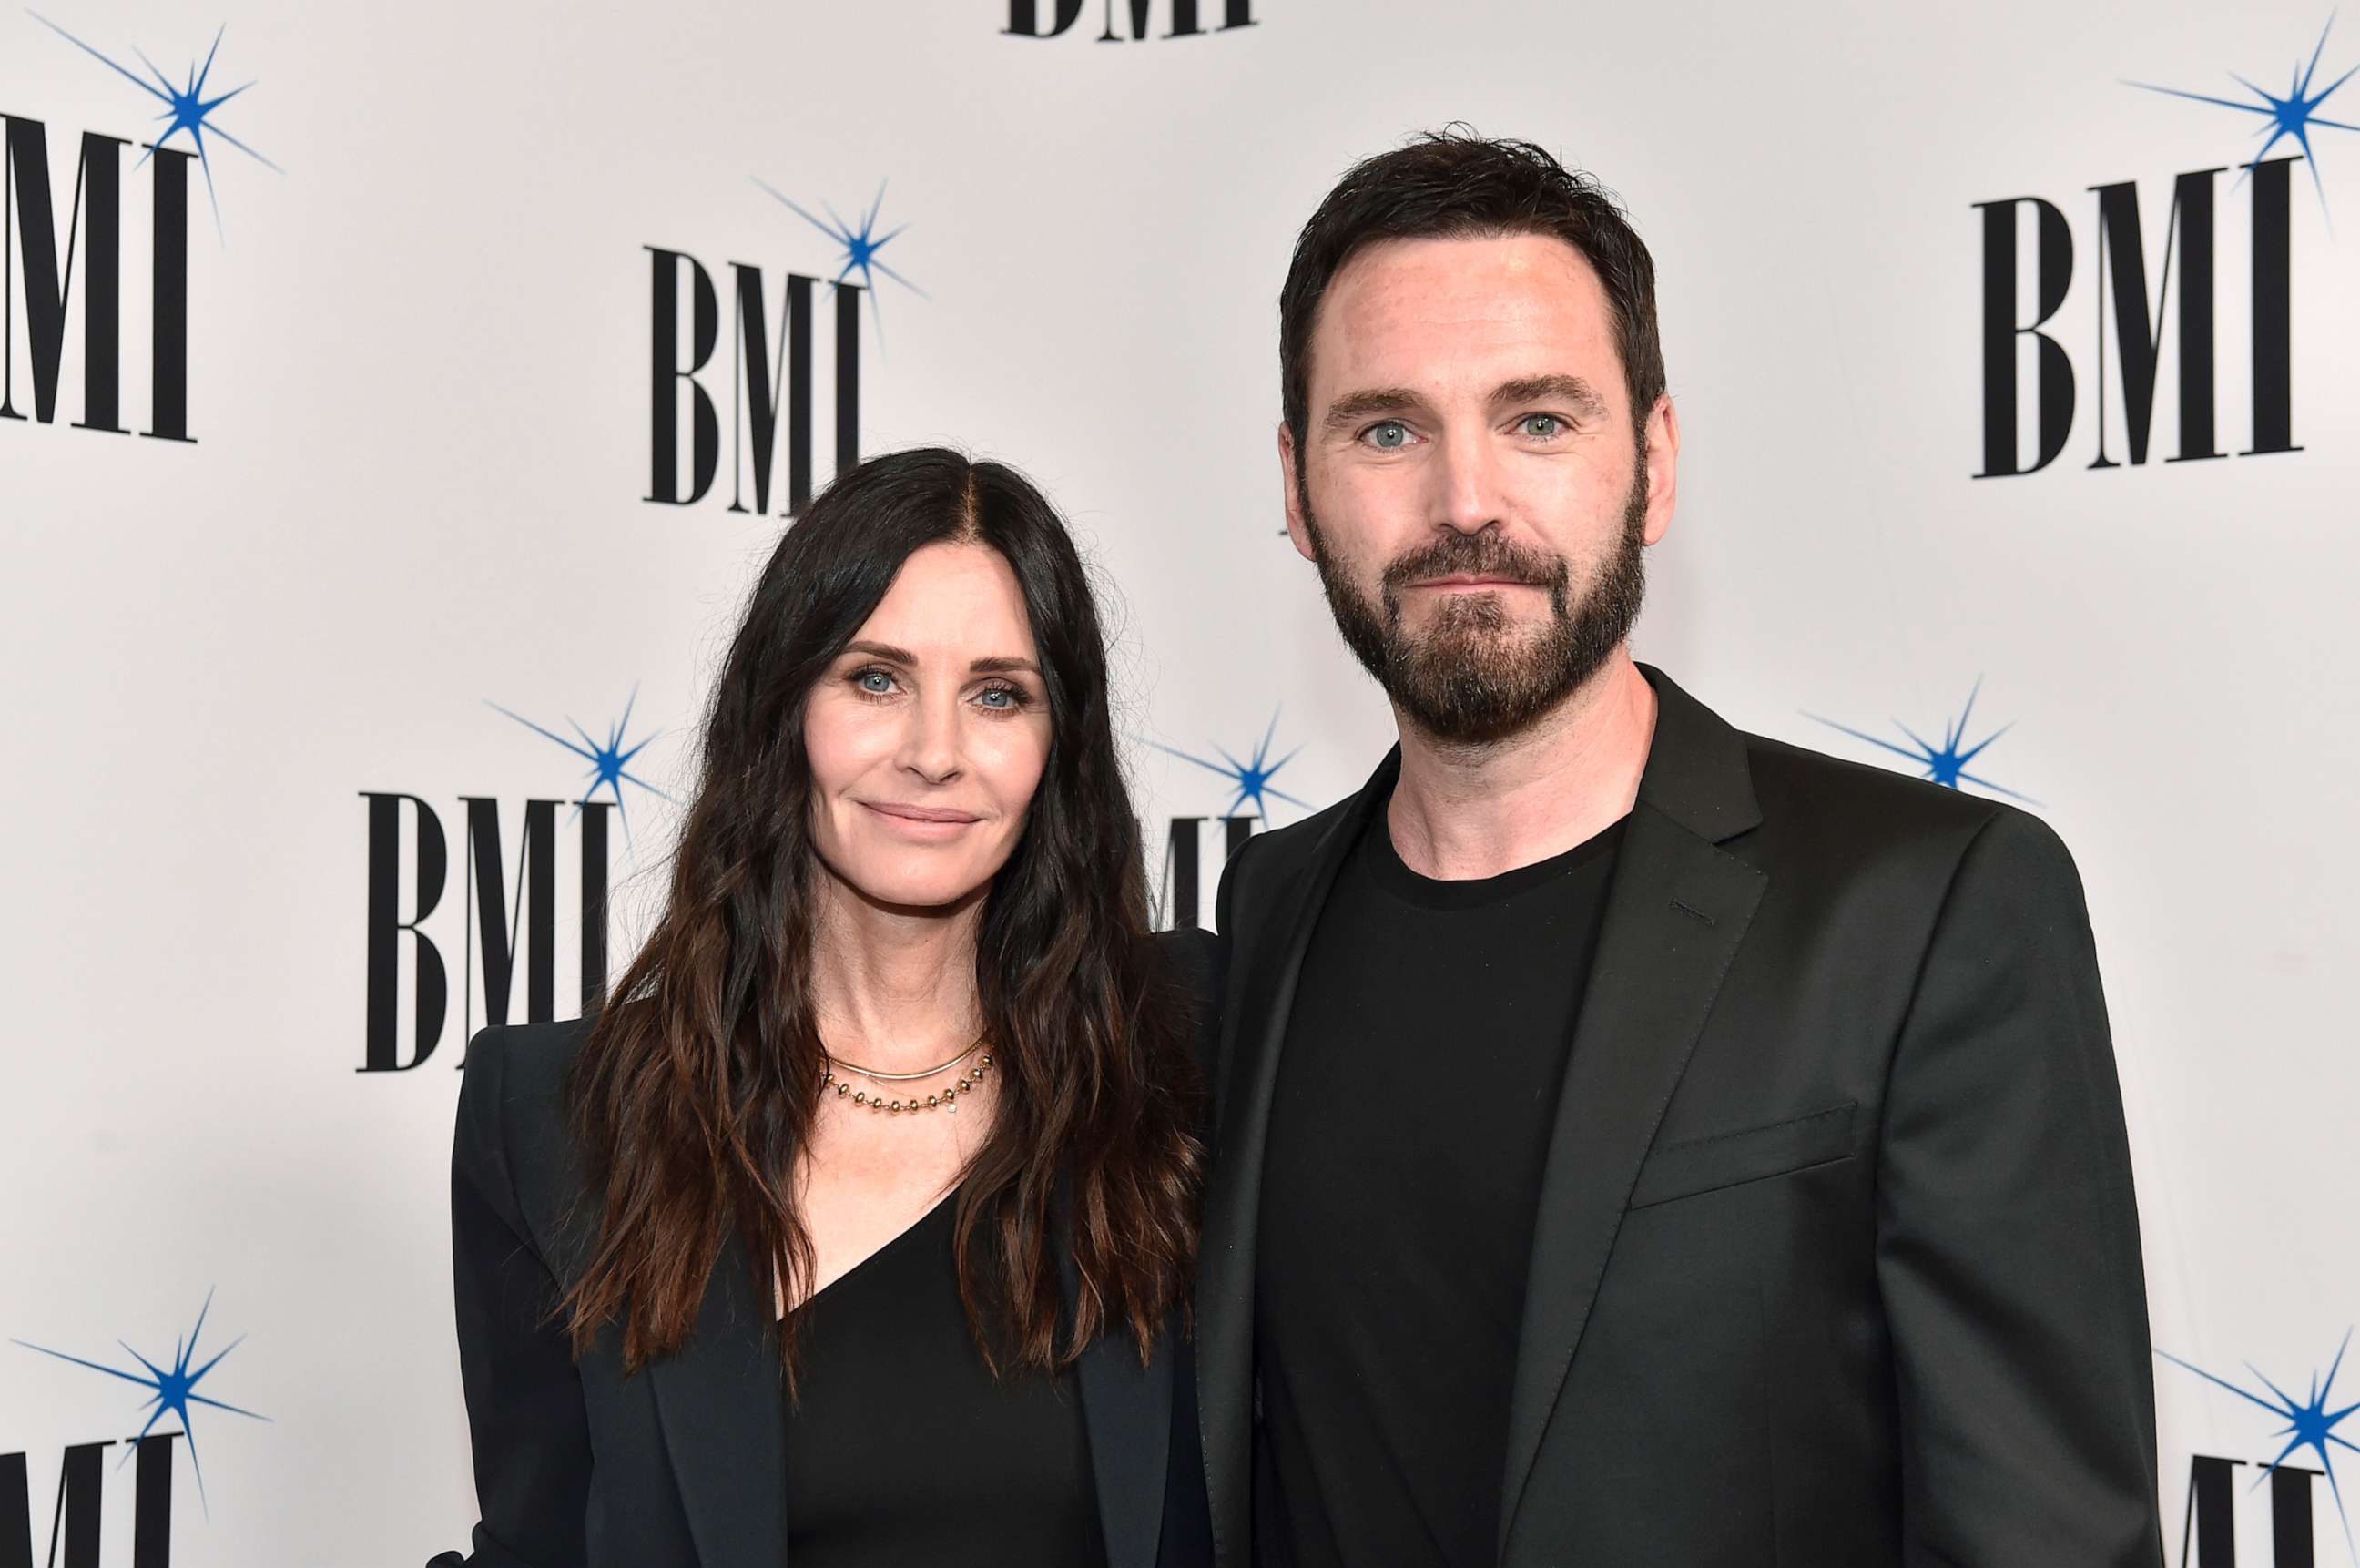 PHOTO: BEVERLY HILLS, CALIFORNIA - MAY 10: (L-R) Courteney Cox and Johnny McDaid attend the 70th Annual BMI Pop Awards at Beverly Wilshire, A Four Seasons Hotel on May 10, 2022 in Beverly Hills, California. (Photo by Rodin Eckenroth/FilmMagic)